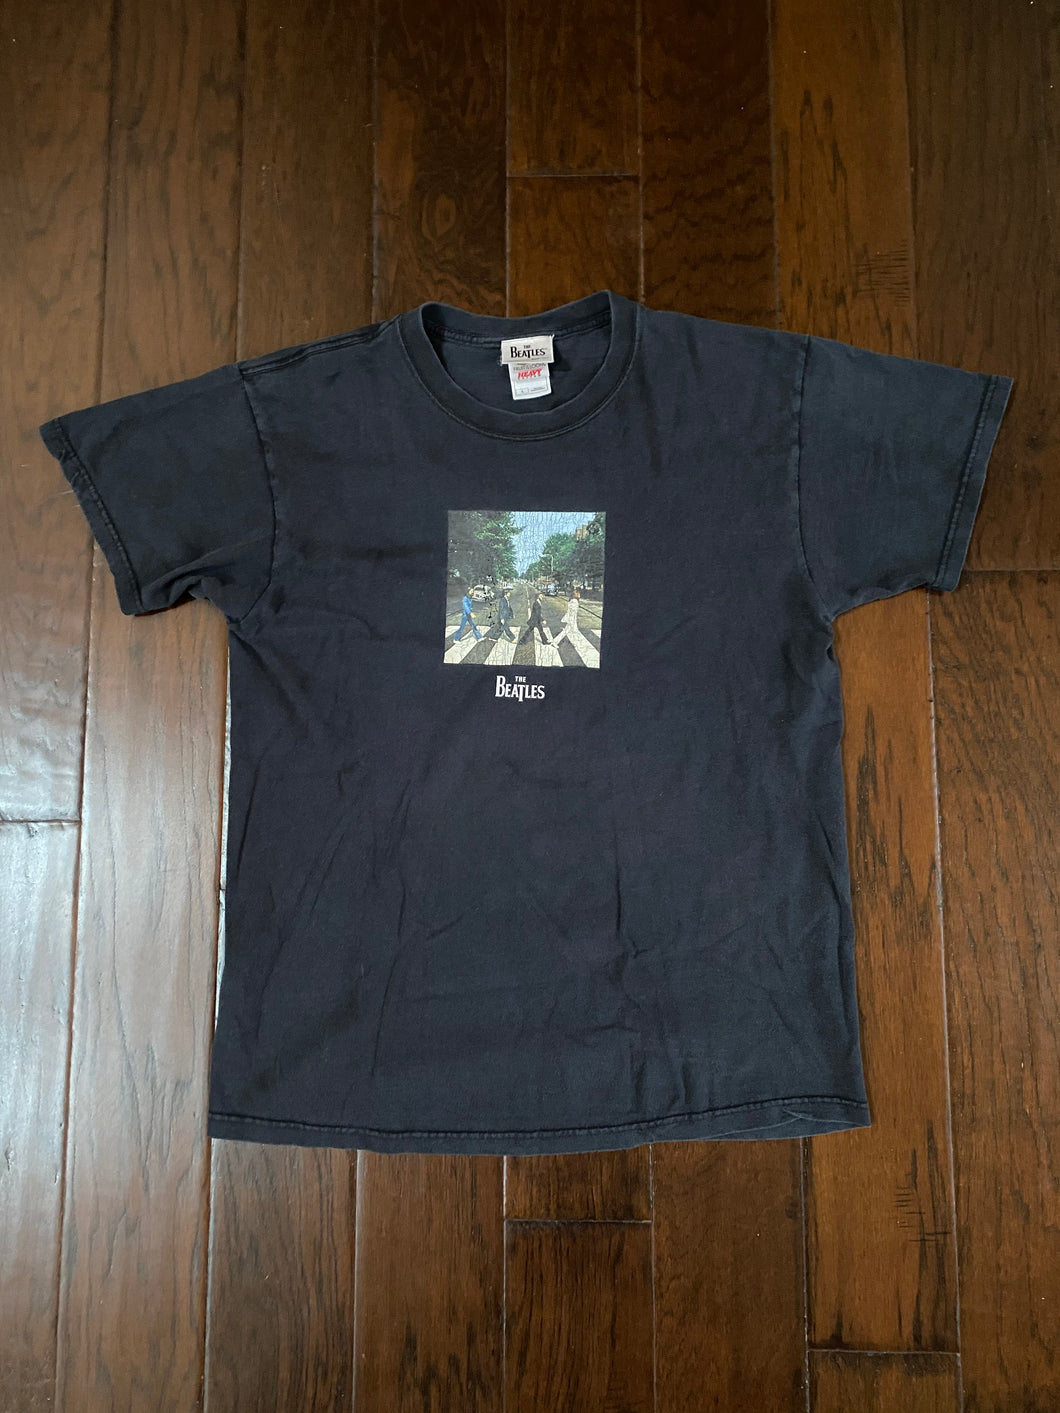 The Beatles 2005 “Abbey Road” Vintage Distressed T-shirt